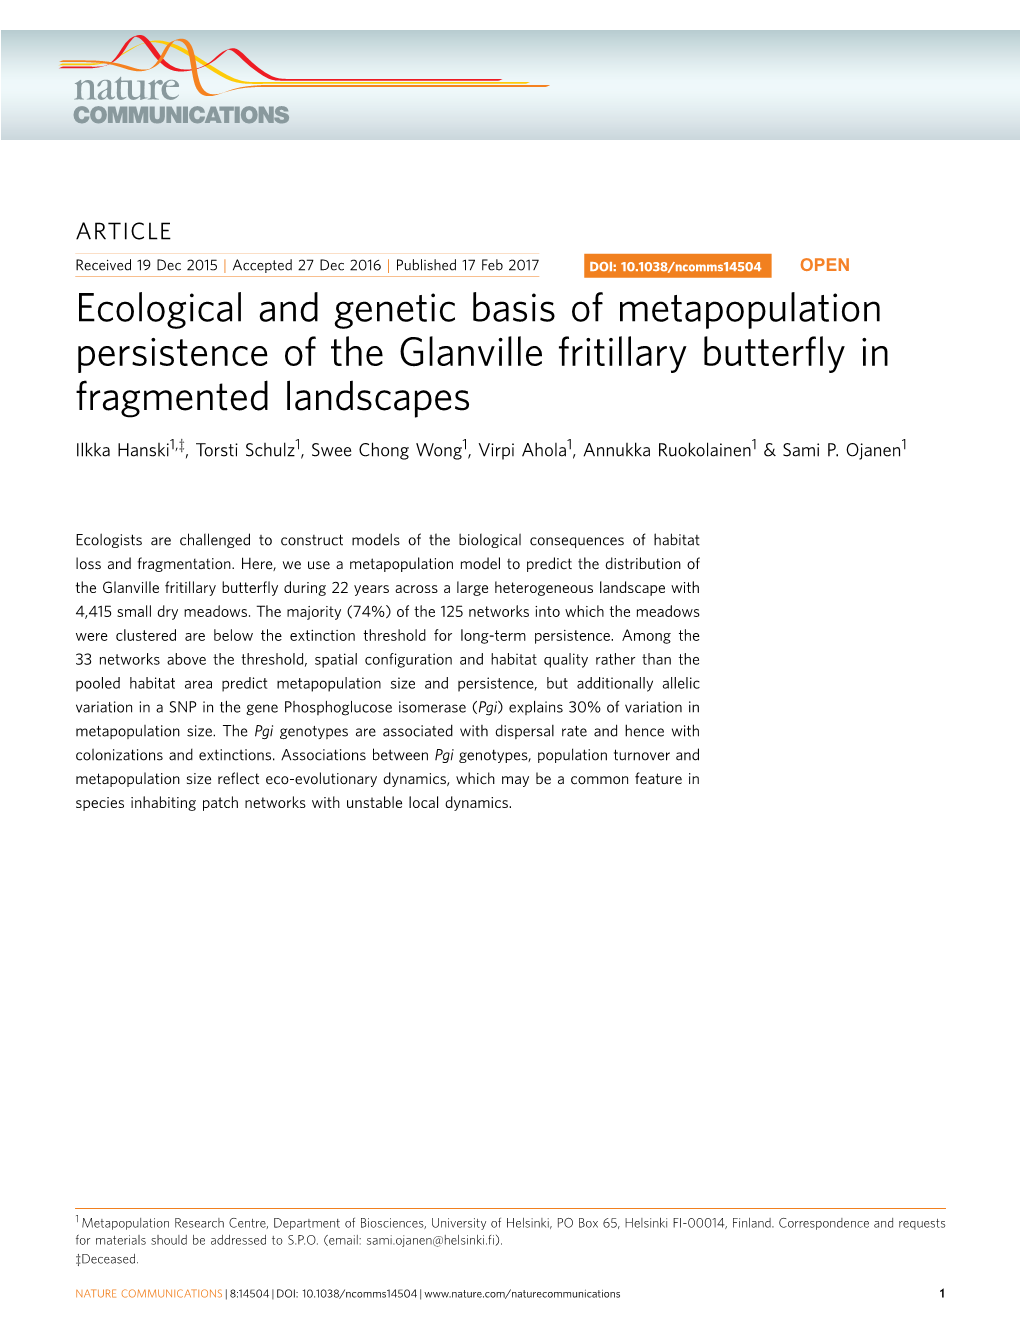 Ecological and Genetic Basis of Metapopulation Persistence of the Glanville Fritillary Butterﬂy in Fragmented Landscapes